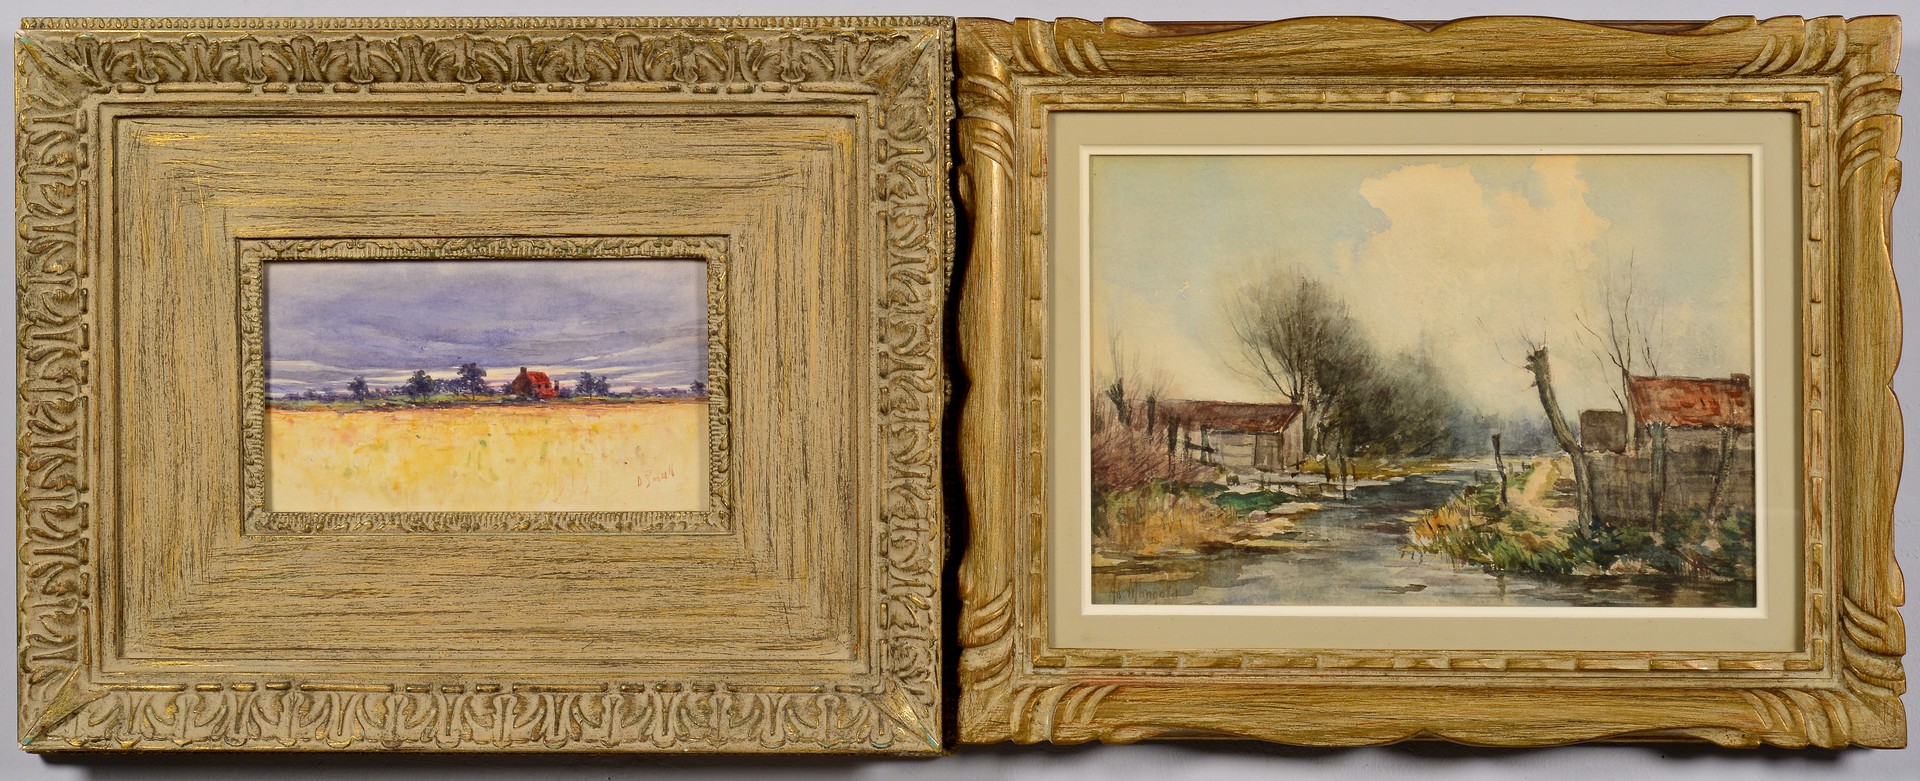 Lot 836: 2 Signed Watercolors, Rural Landscapes, late 19th